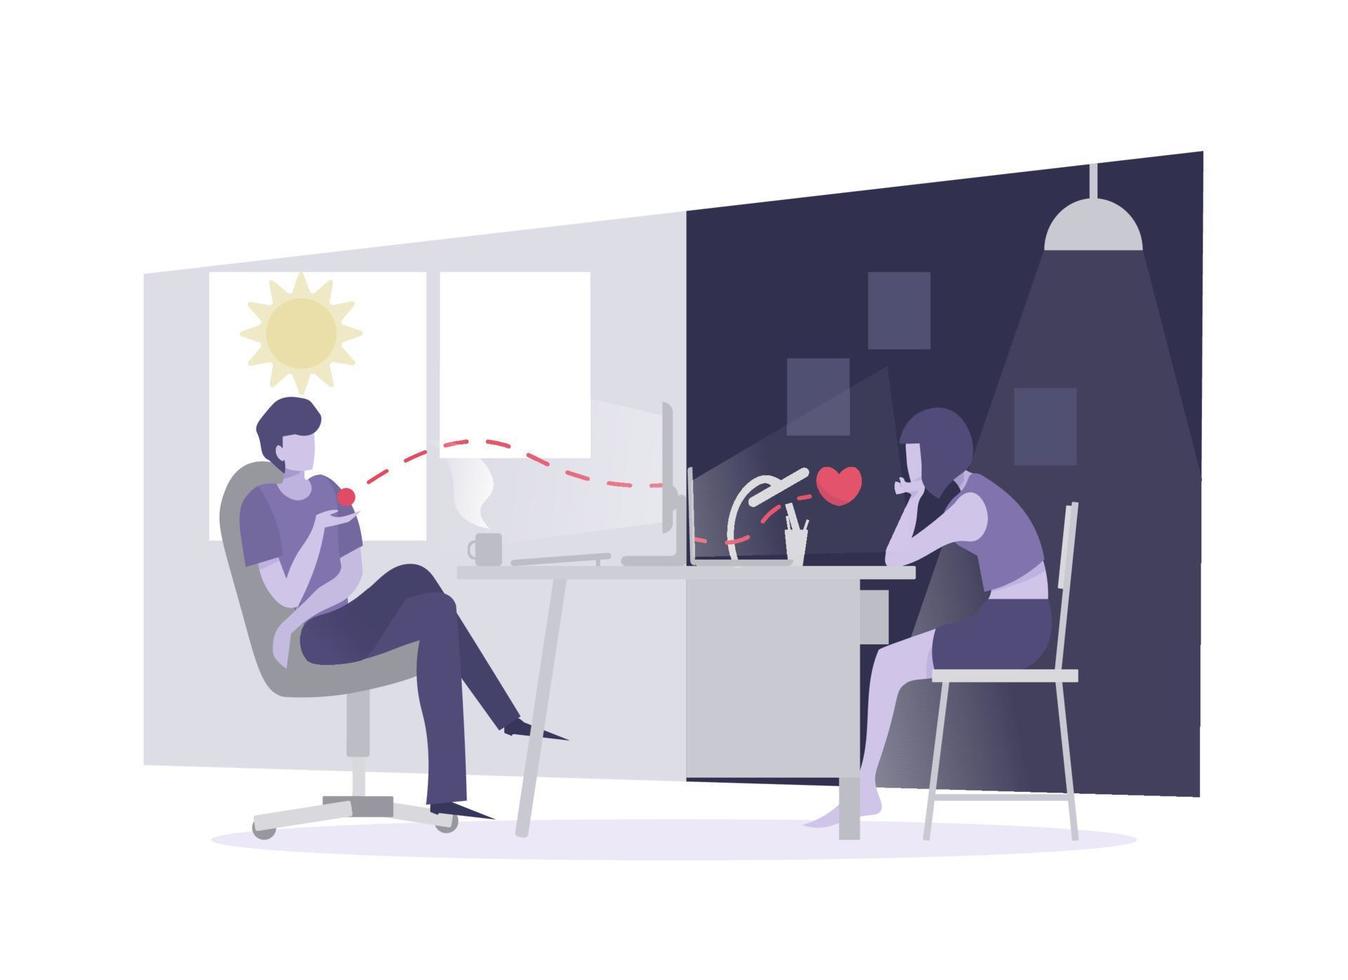 Online dating, virtual relationship and long distance relationship concept. Young couple talking to each other via online video chat vector